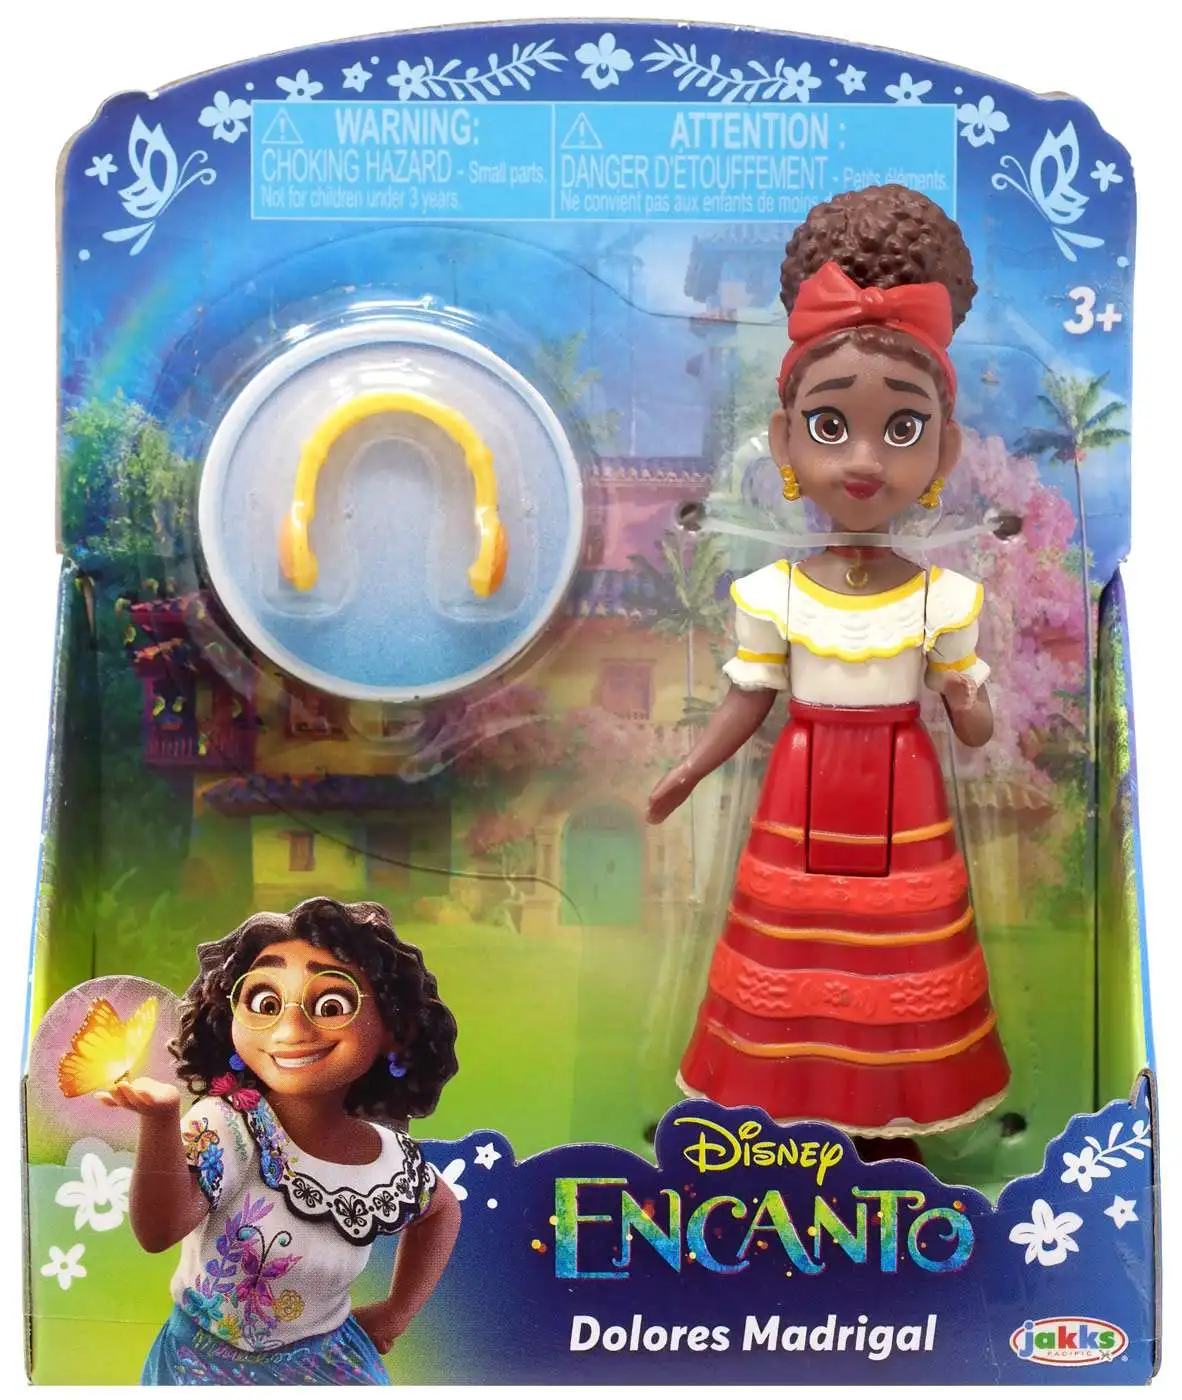 Disney Encanto We Don't Talk About Bruno 3 inch Small Collectible Fashion  Doll Inspired by the Movie